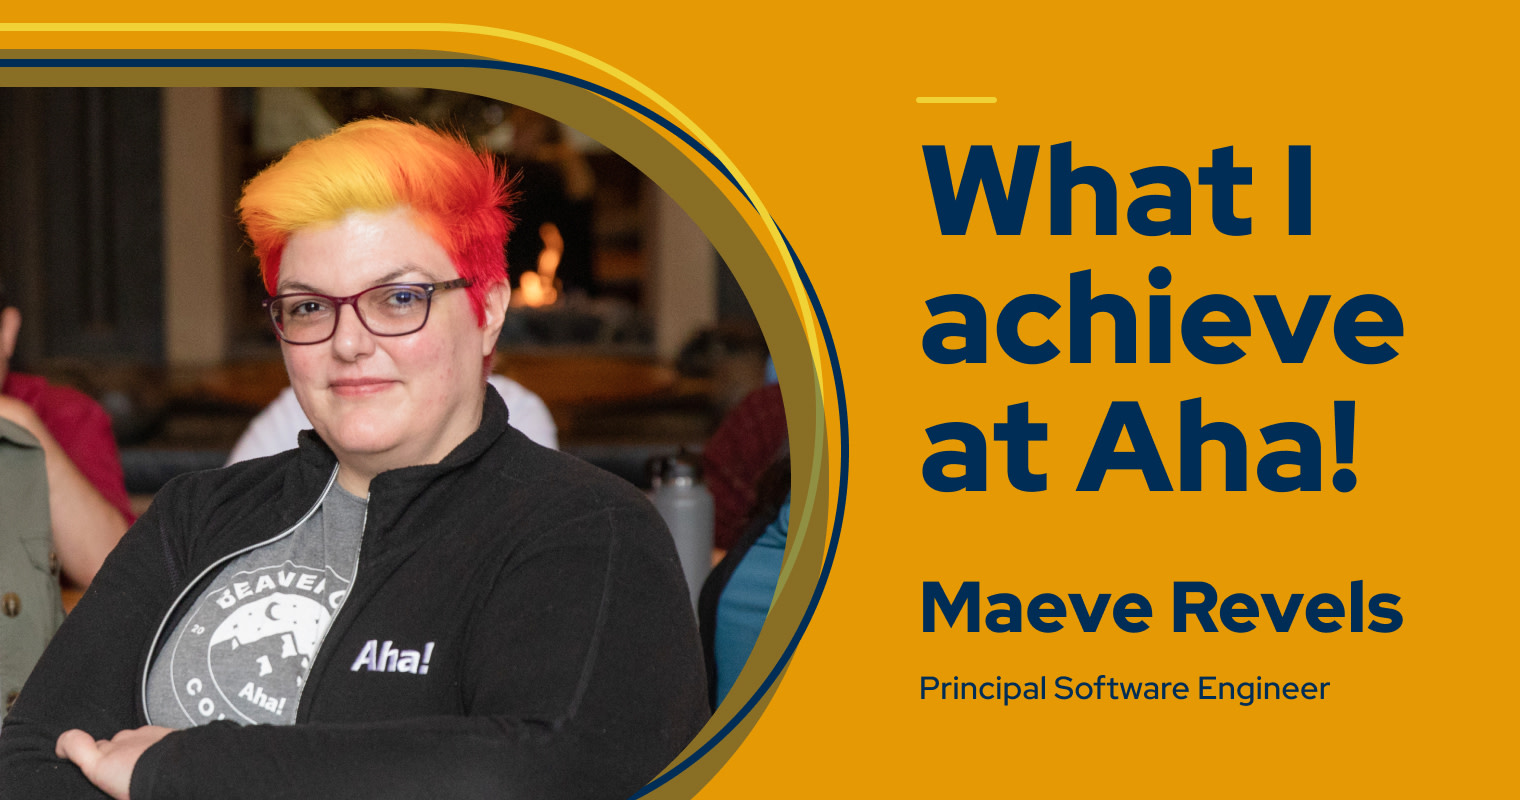 My name is Maeve Revels — this is what I achieve at Aha!